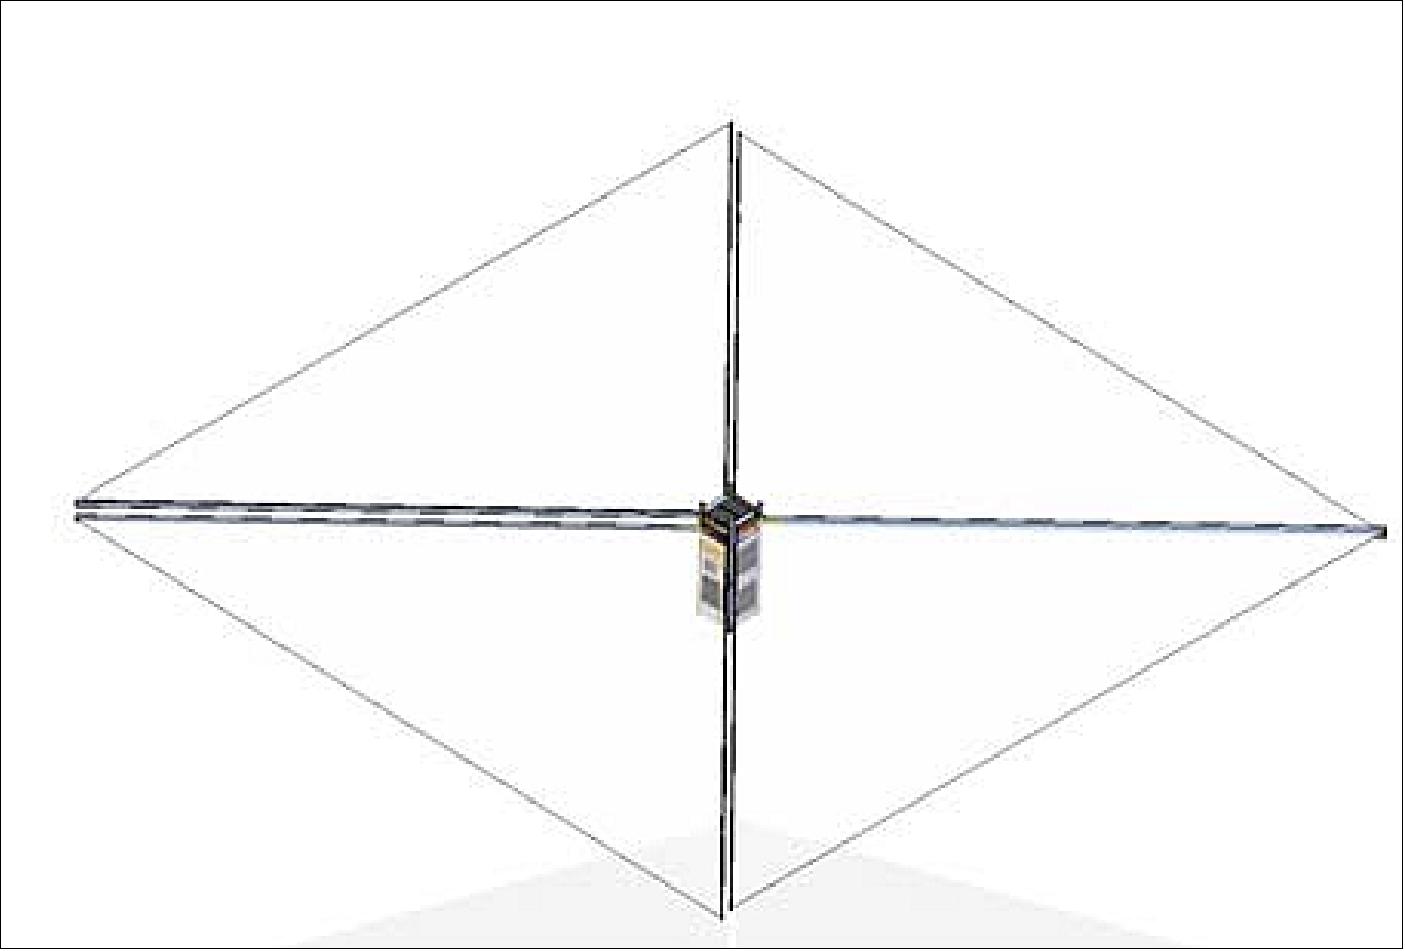 Figure 17: CanX-7 spacecraft with deployed drag sail (image credit: UTIAS/SFL)